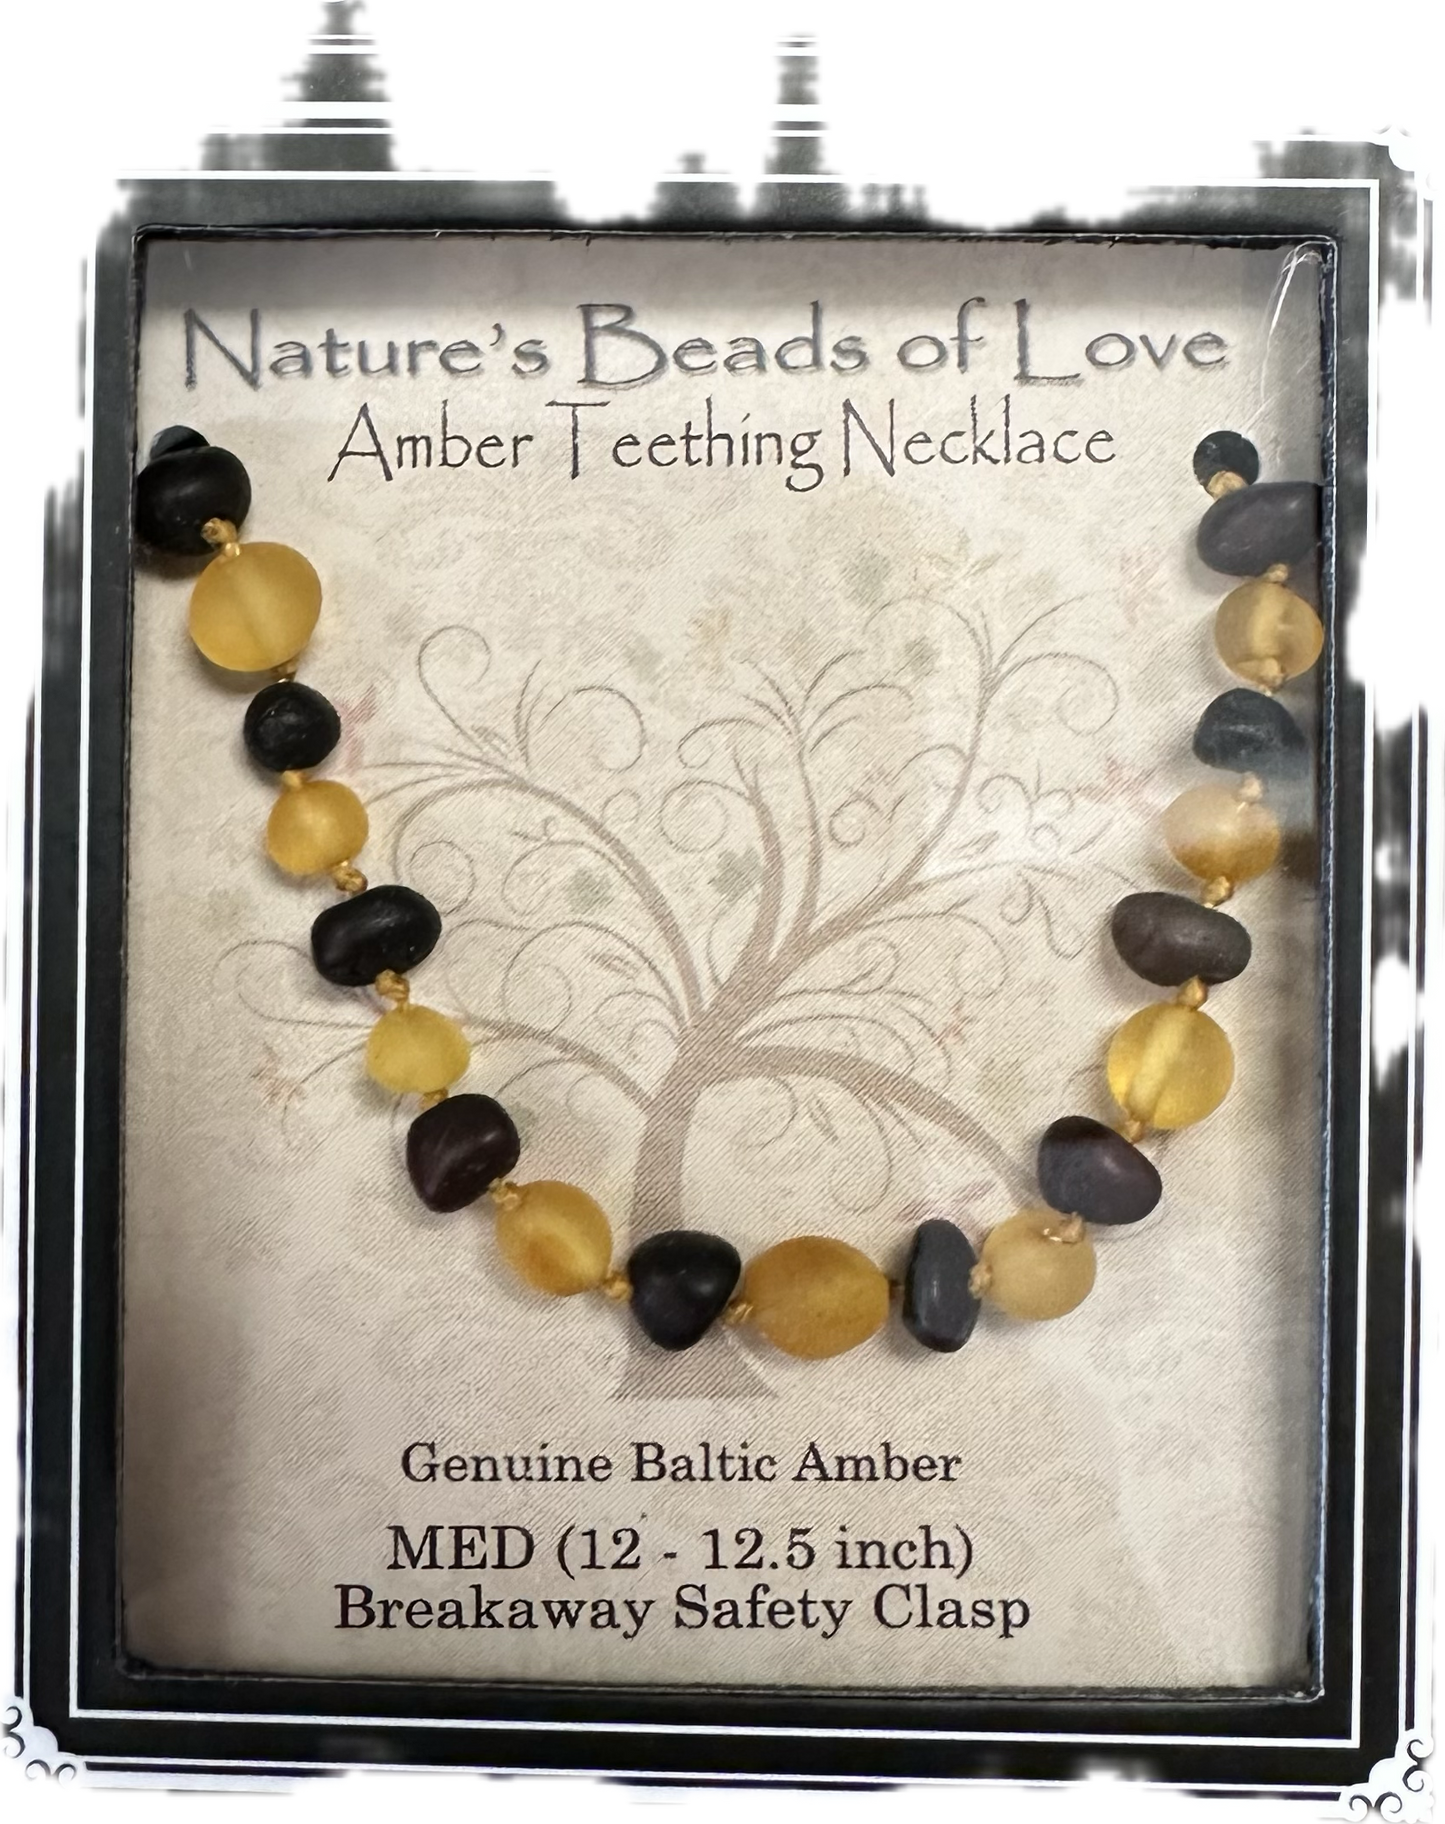 TEETHING NECKLACE